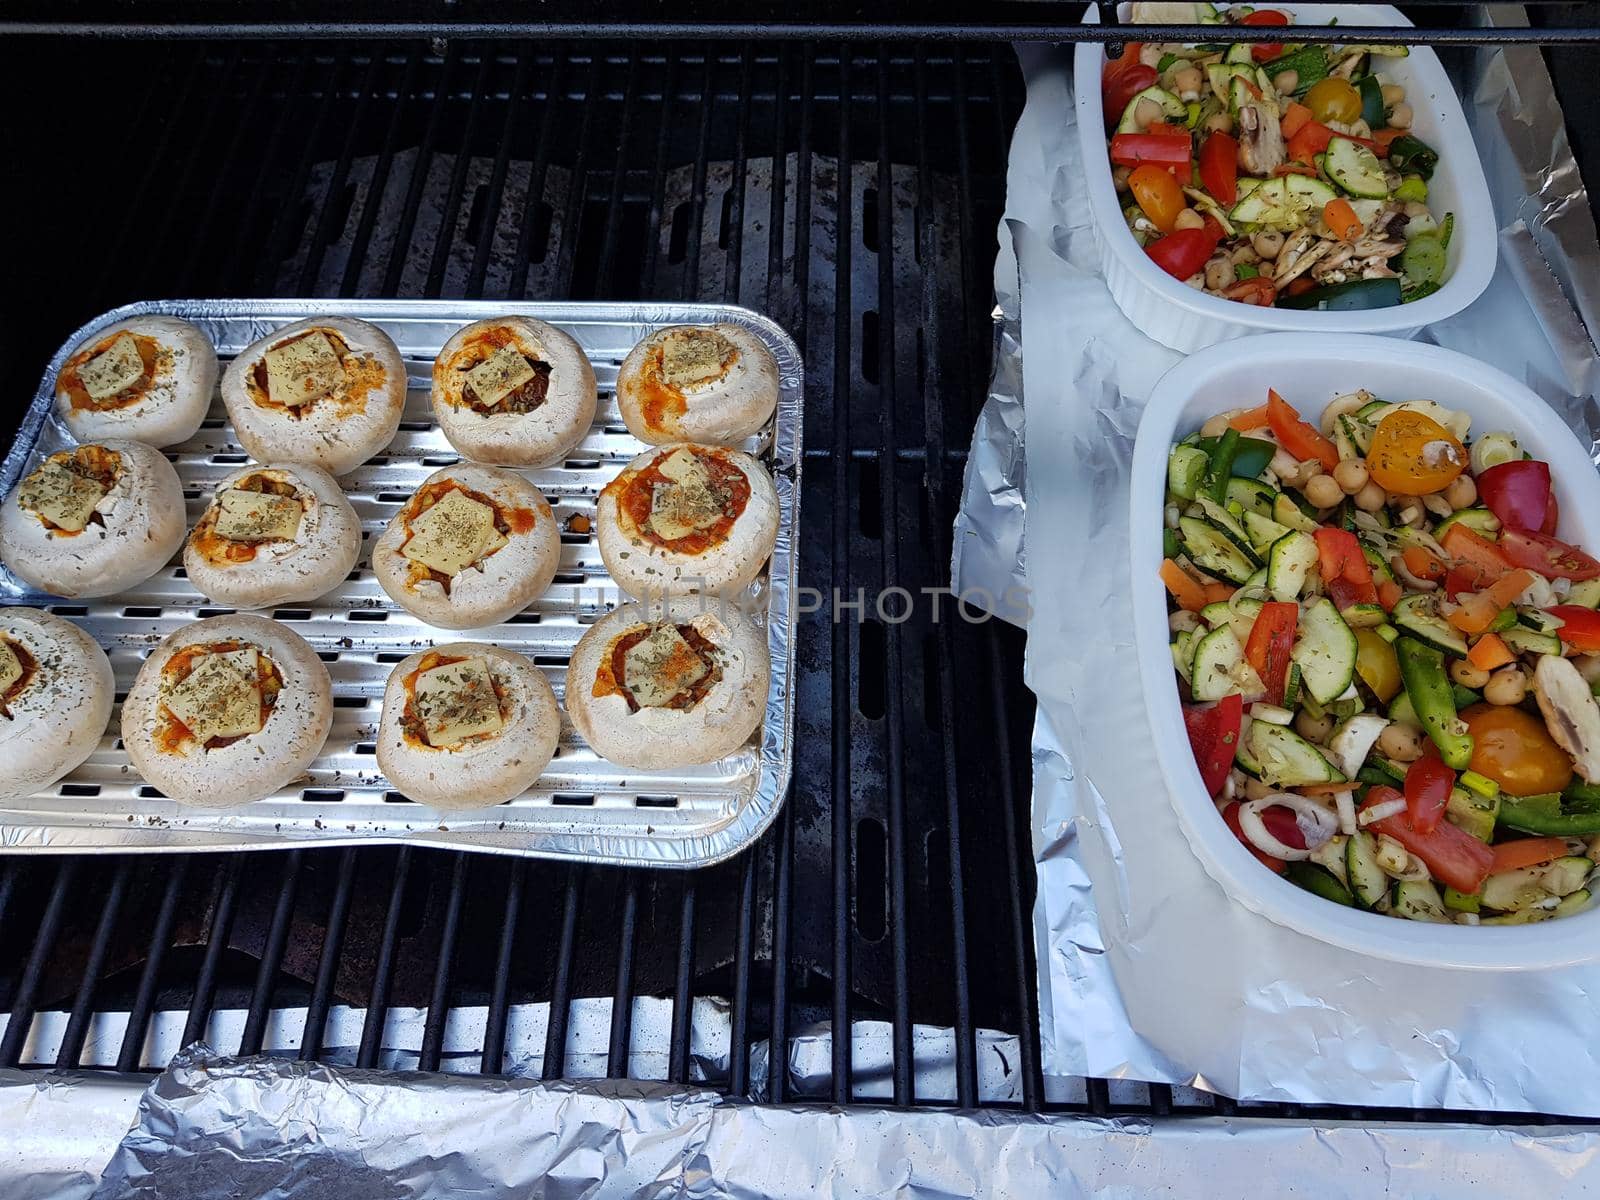 Grilled vegetables on a barbecue grill  by JFsPic